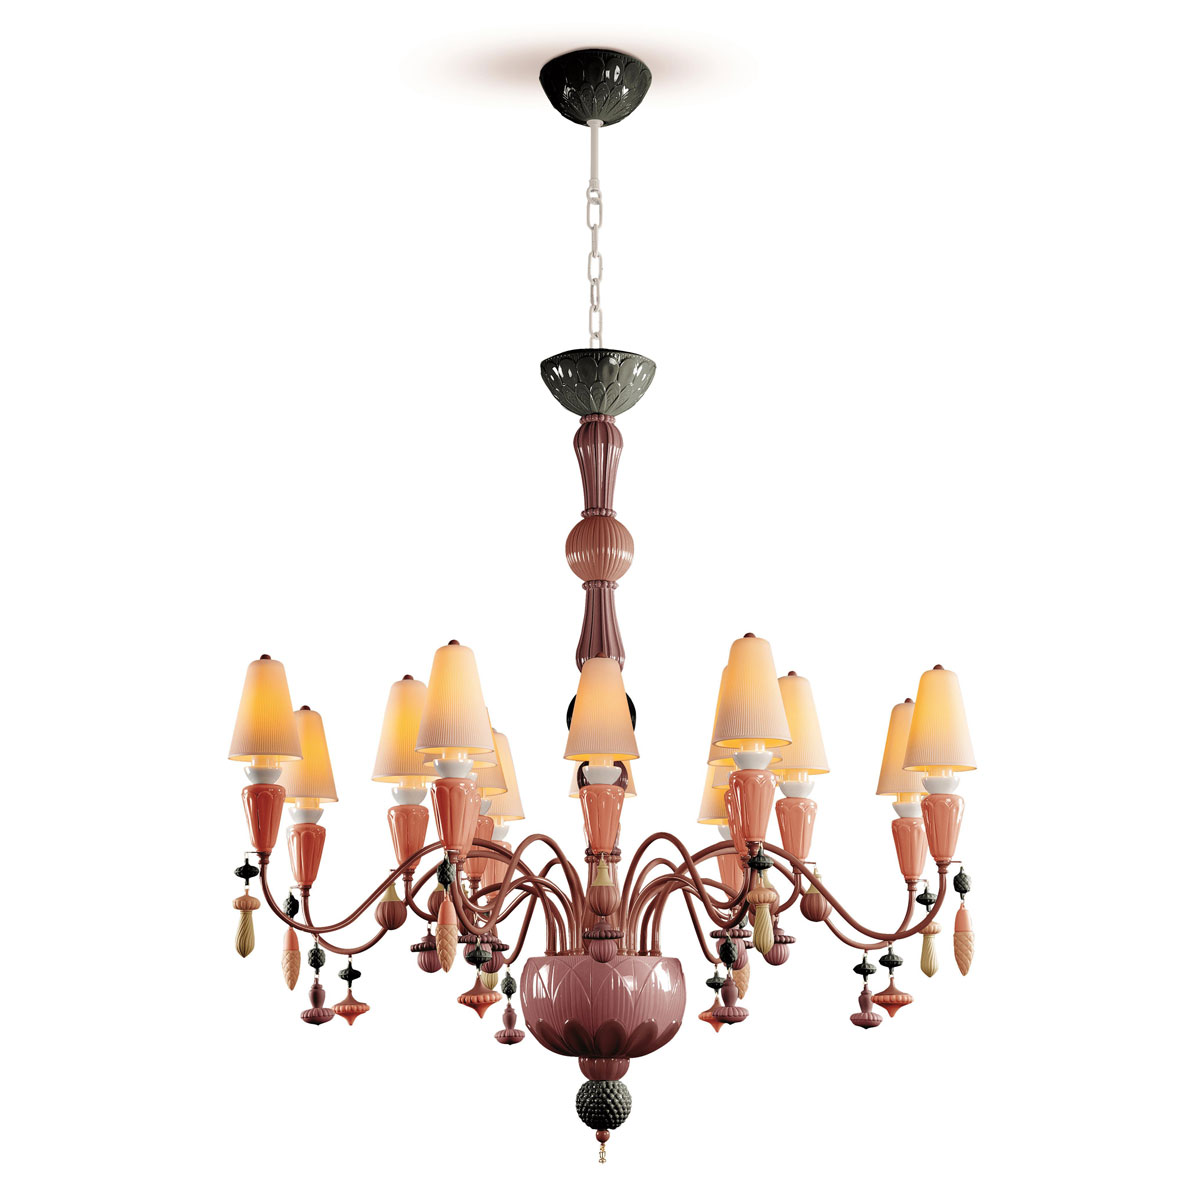 Lladro Classic Lighting, Ivy And Seed 16 Lights Chandelier. Medium Flat Model. Red Coral